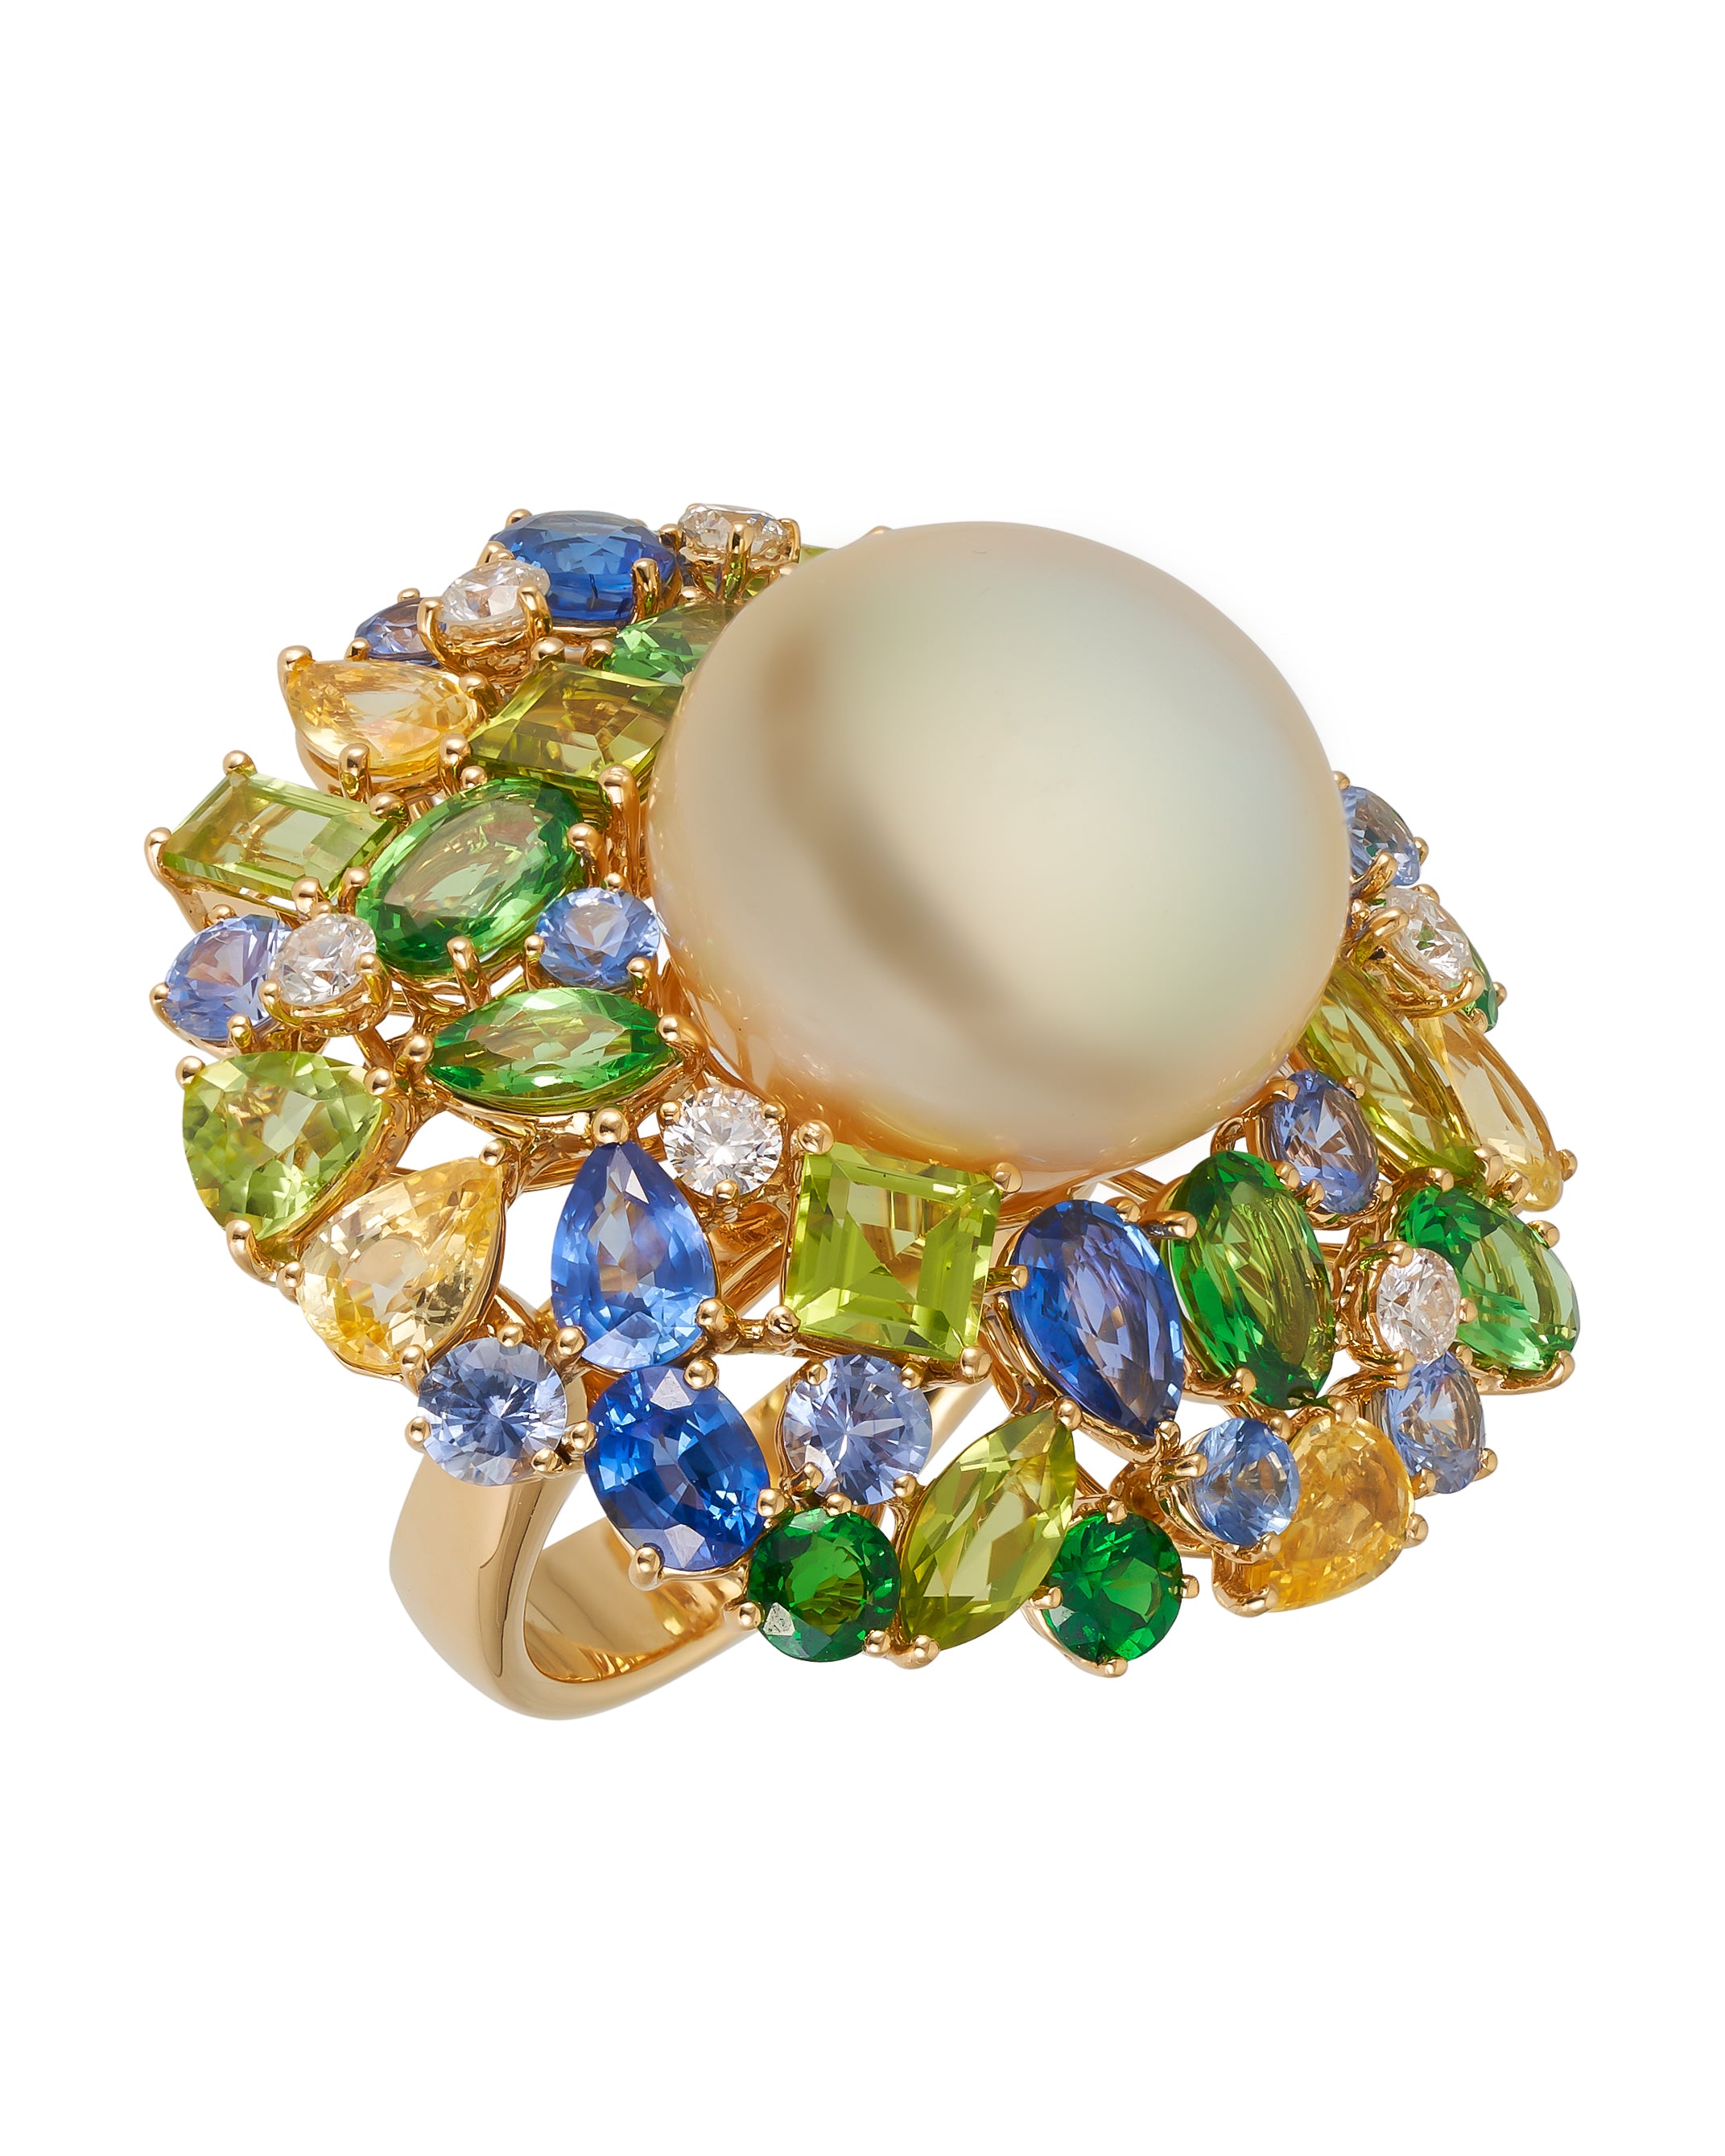 Golden Pearl Swirl ring surrounded by a myriad of gemstones, crafted in 18 karat yellow gold